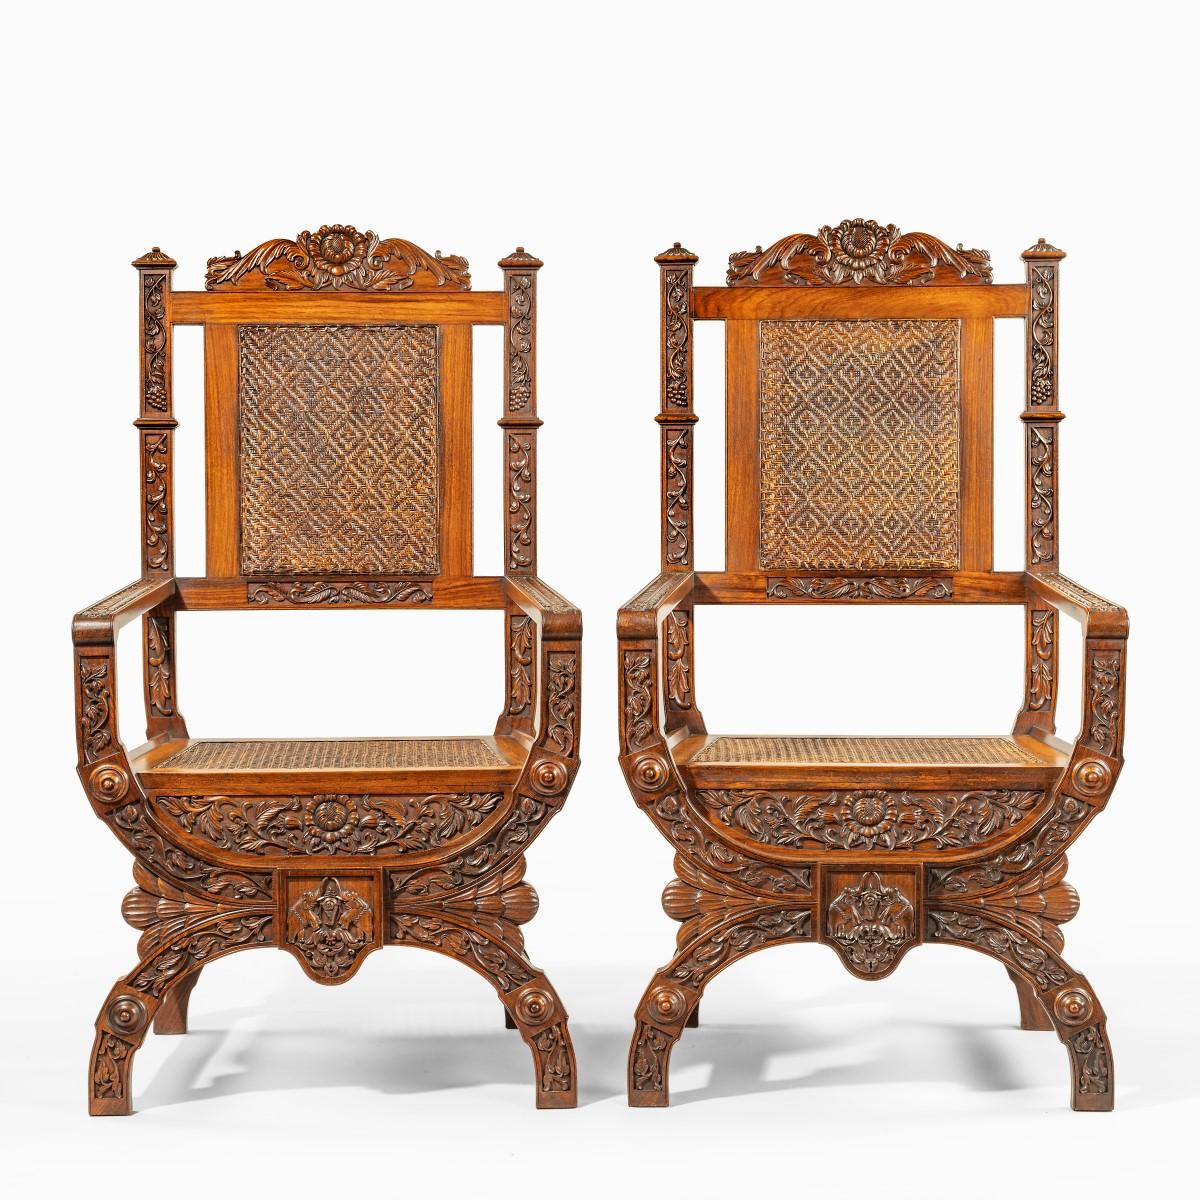 A pair of Indian throne chairs, carved with the arms of the Kingdom of Travancore, each of curule or “x-framed” form carved with fleshy naturalistic flowers, tendrils, vines and foliage, the seat and back with rattan panels, the X centred on an